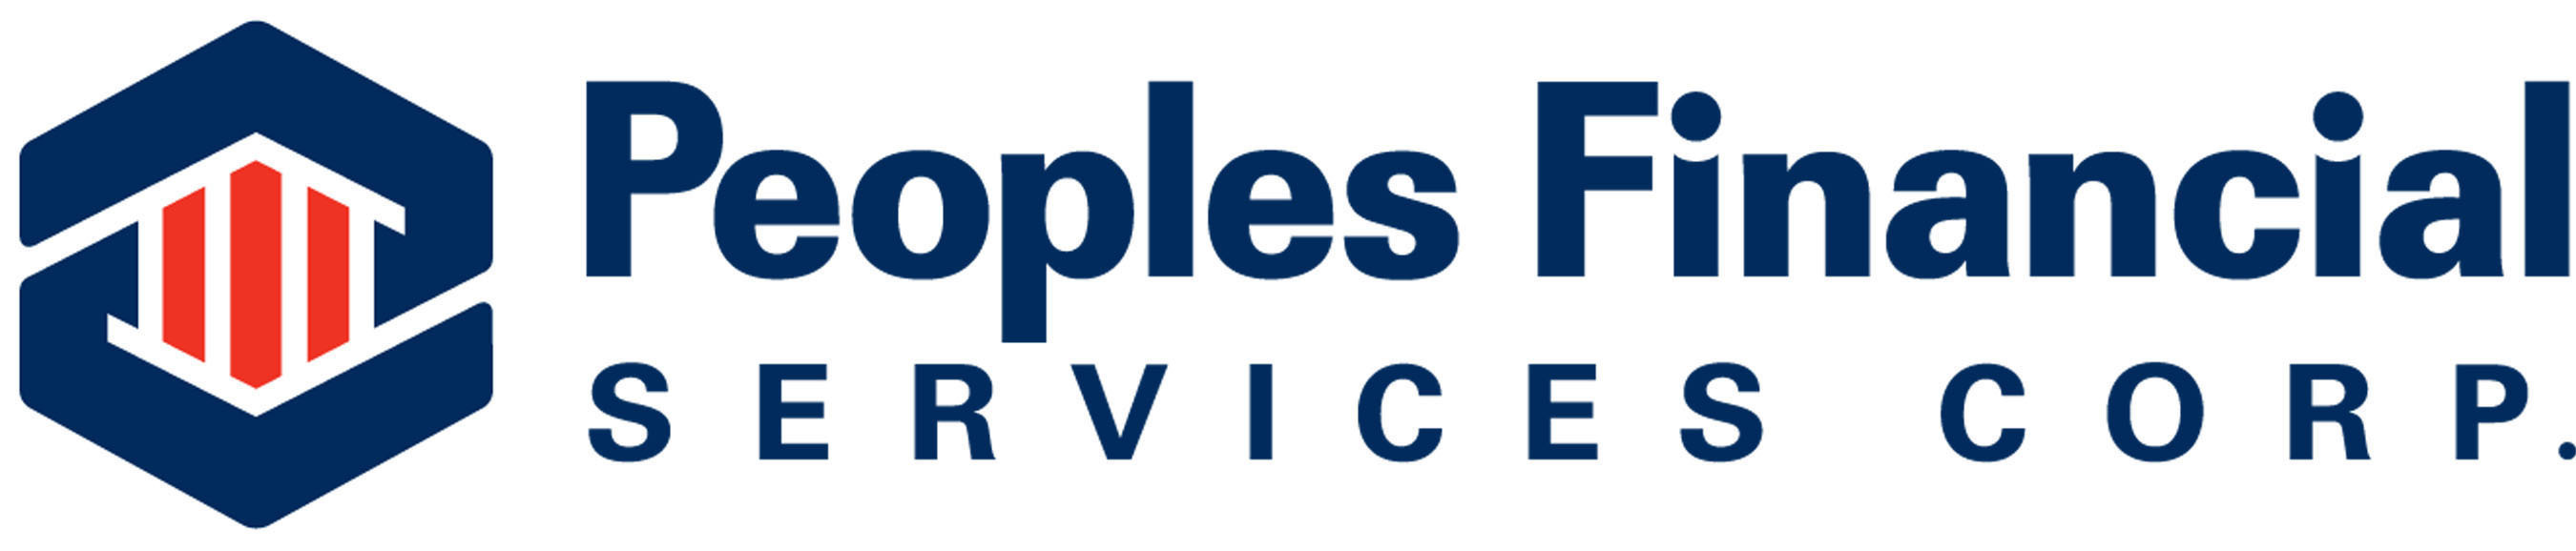 Peoples Financial Services Corp. Logo